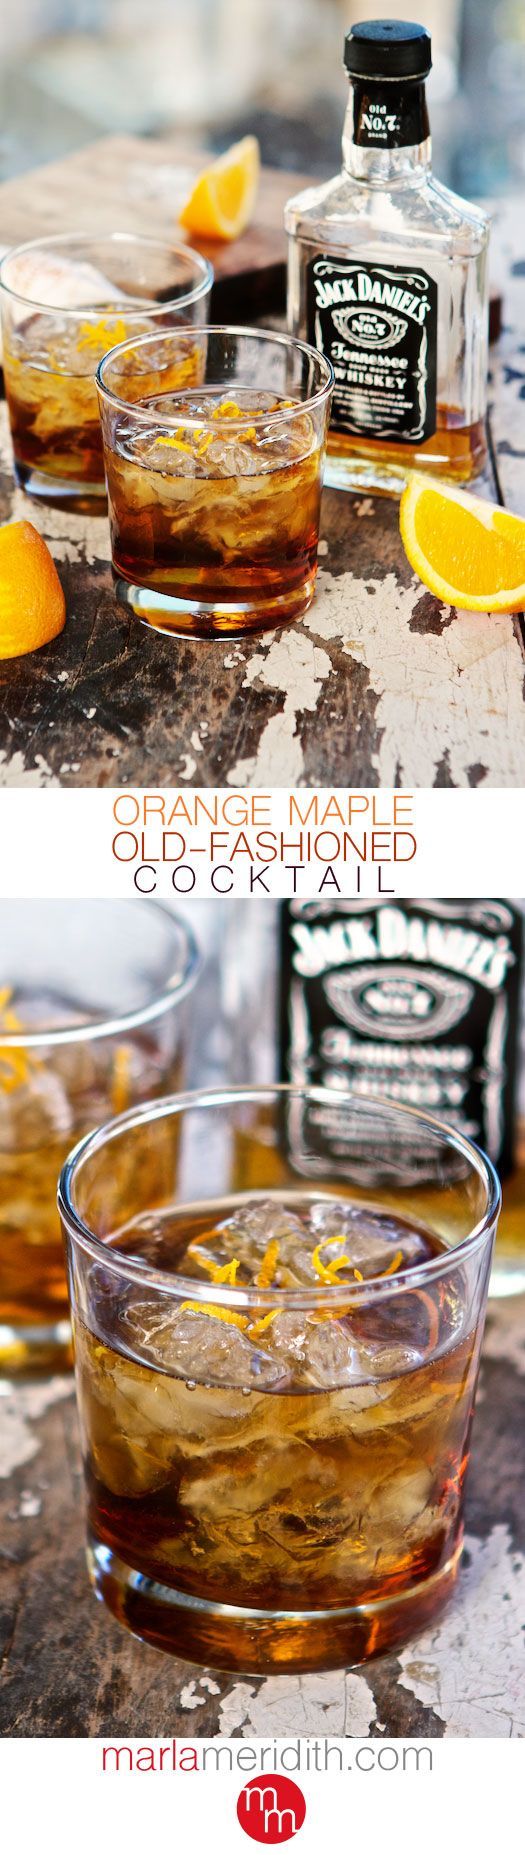 Orange Maple Old-Fashioned Cocktail | A Whiskey Lover’s Drink | MarlaMeridith.com